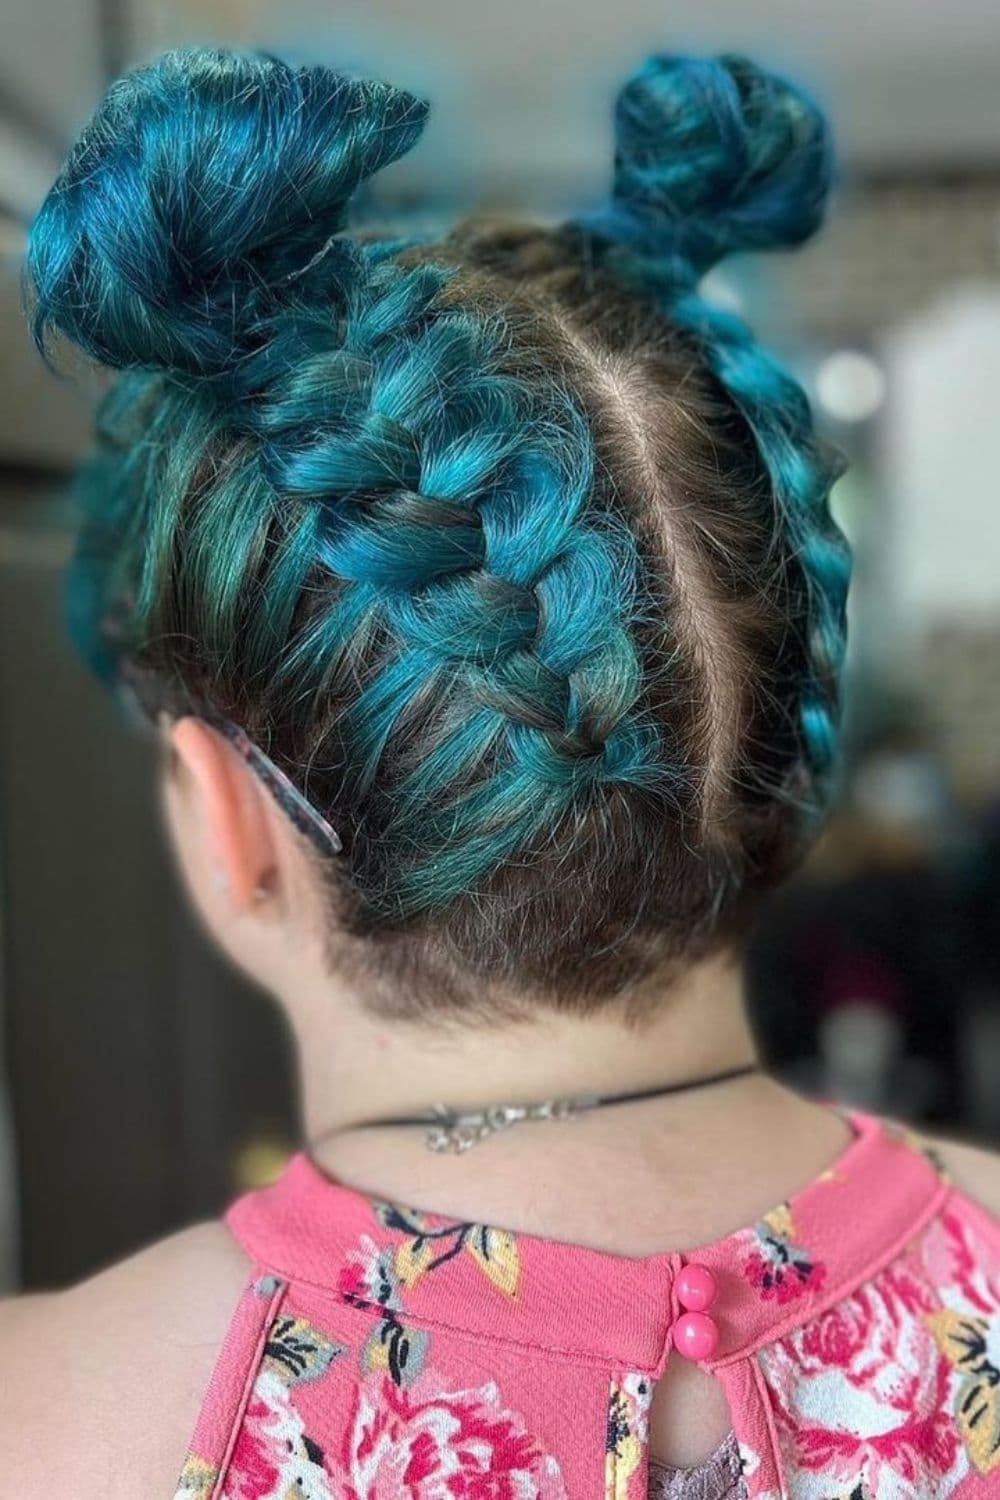 A woman with emerald green inverse braids with space buns.